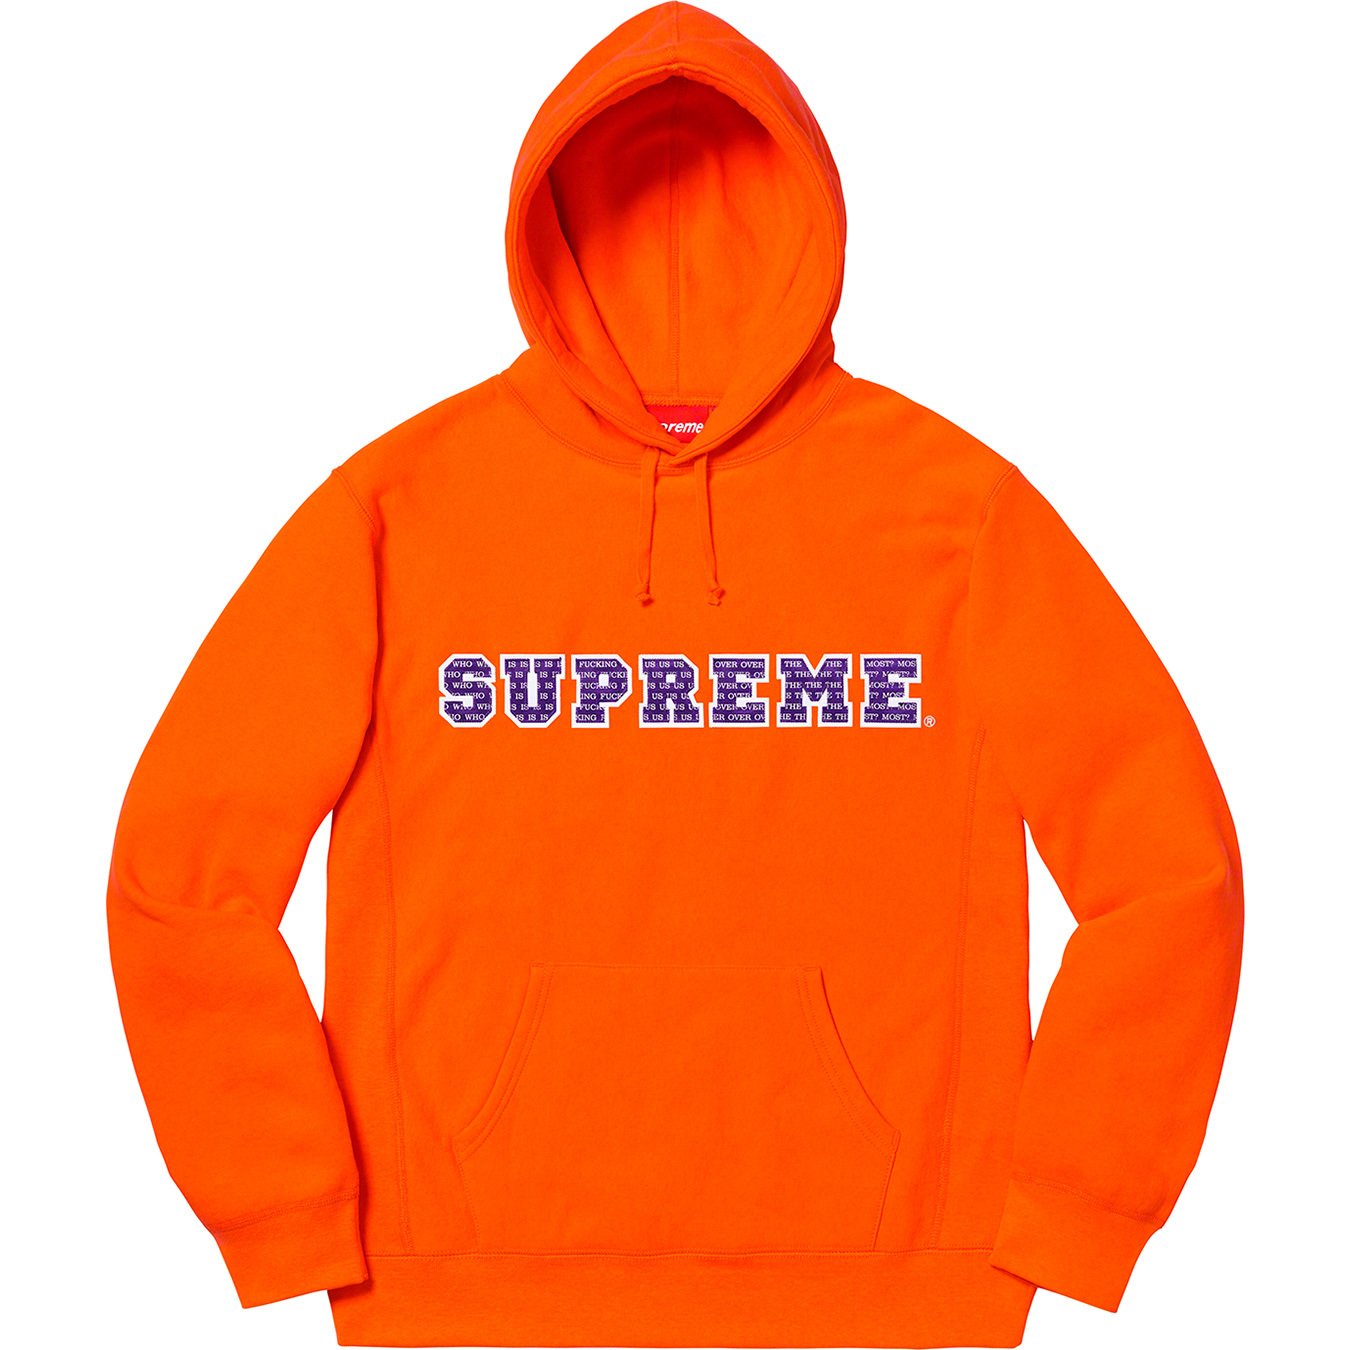 The Most Hooded Sweatshirt - fall winter 2019 - Supreme